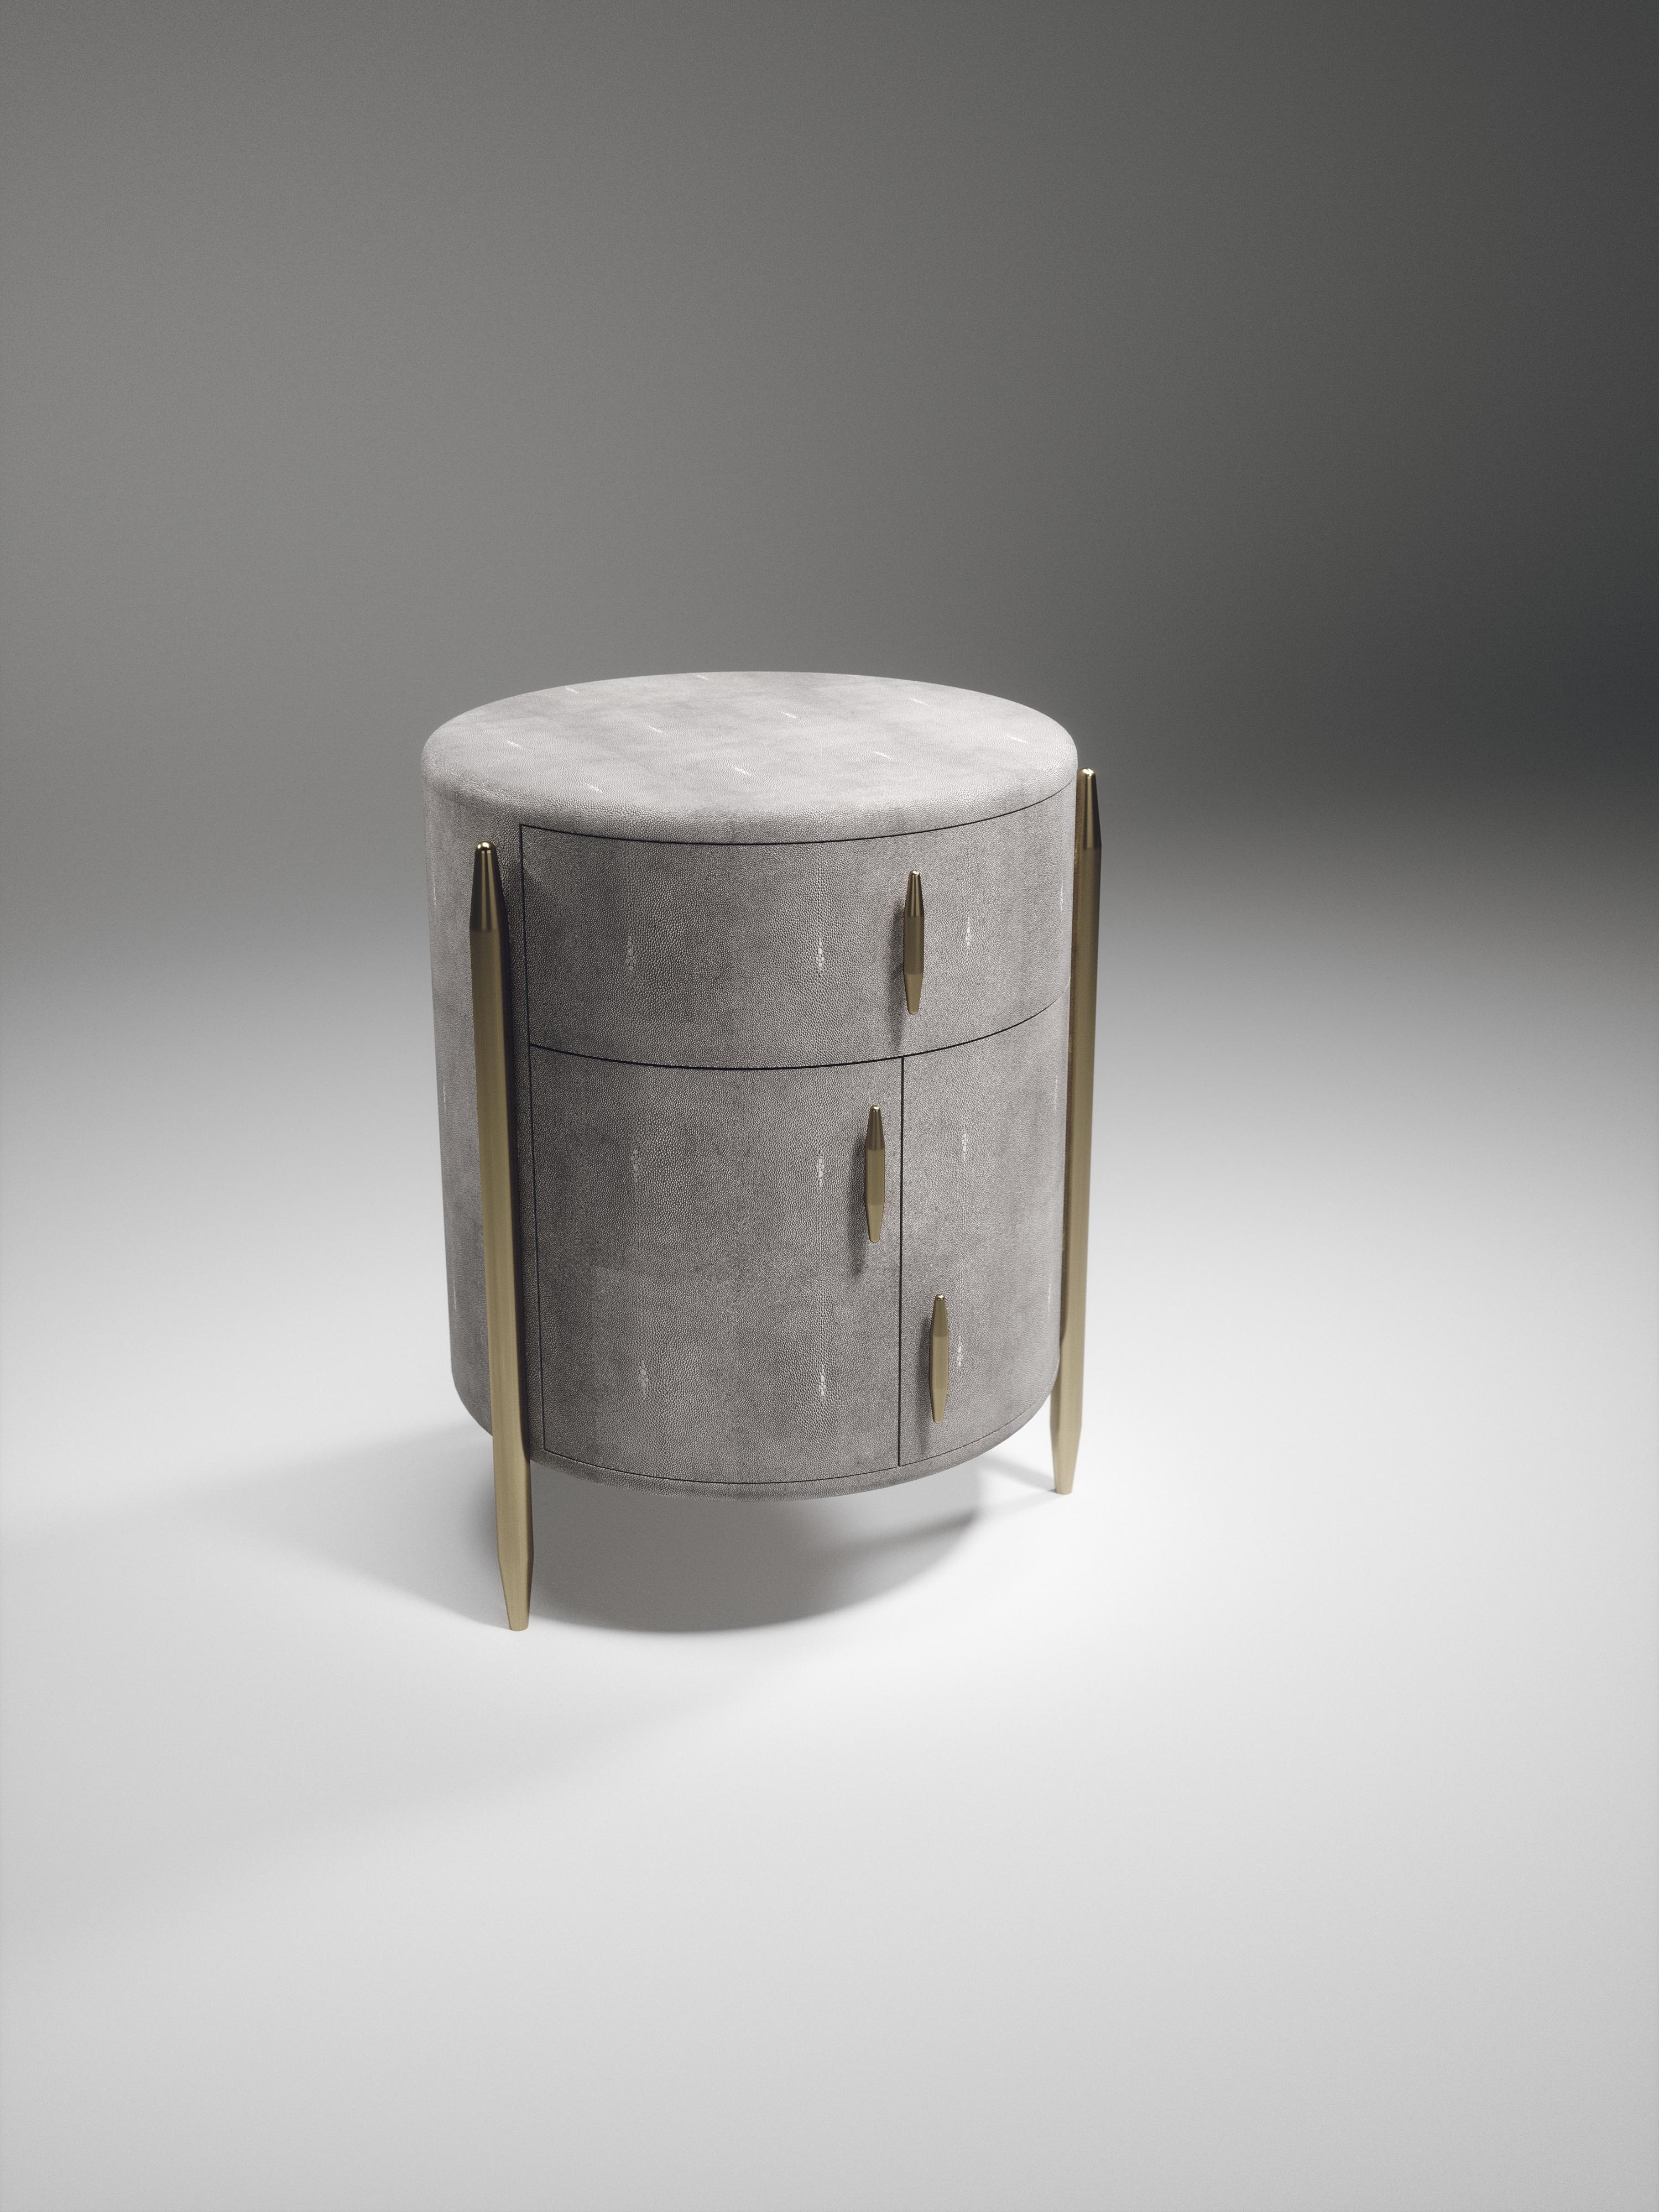 The pair of dandy round bedside tables by Kifu Paris are elegant and luxurious home accents, inlaid in light grey shagreen with bronze-patina brass details. This piece includes 1 drawer total and a cabinet below; the interiors are inlaid in gemelina